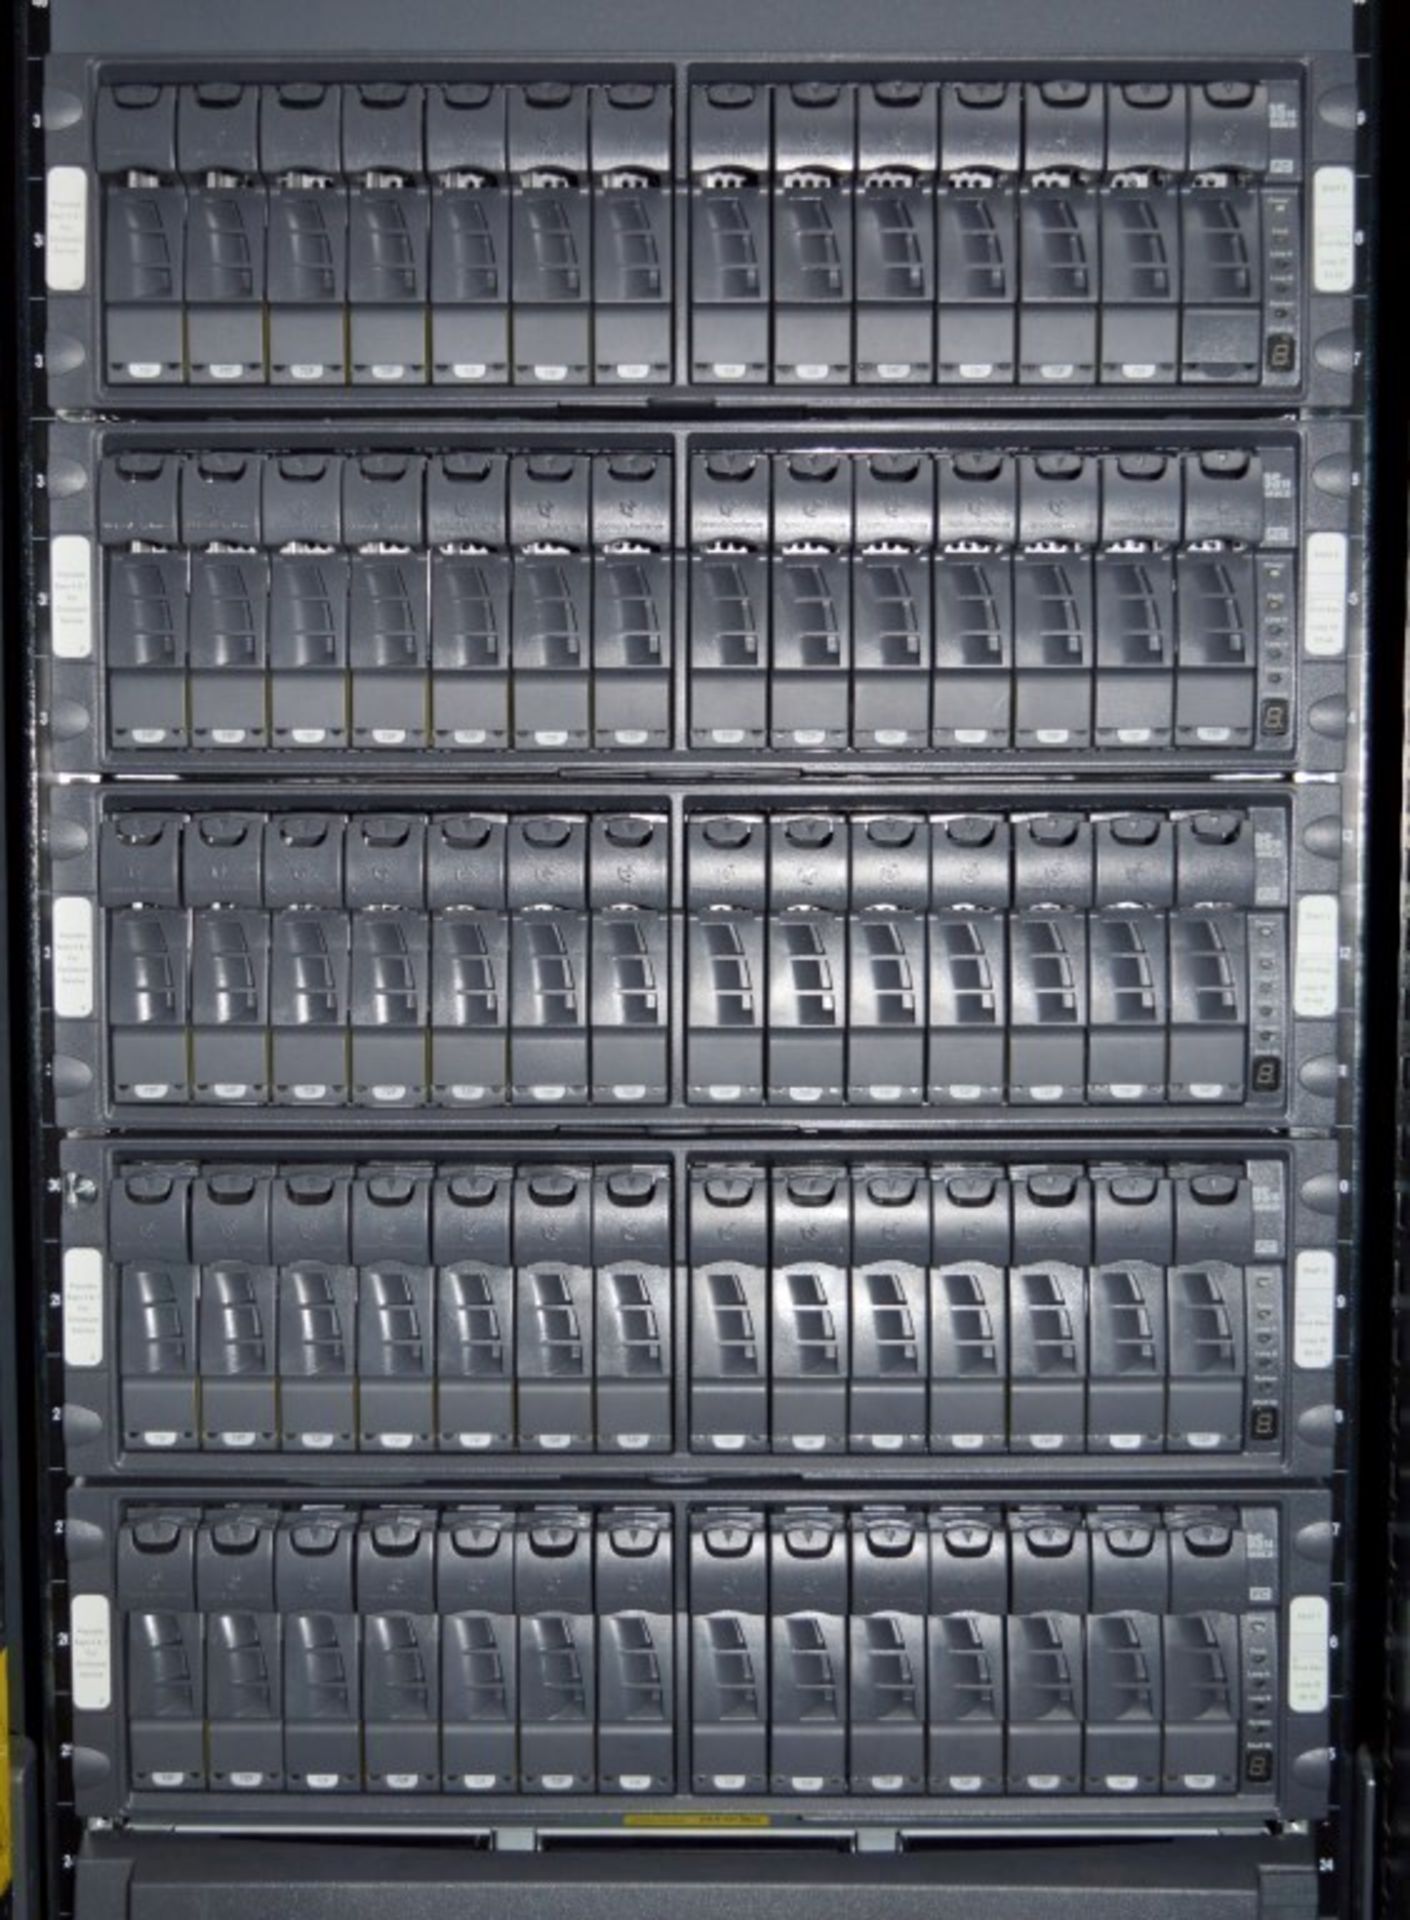 1 x Network Appliance Netapp Filer - Netapp Data Rack With 1 x FAS3140 Controller and 9 x DS14 MK2 - Image 22 of 23